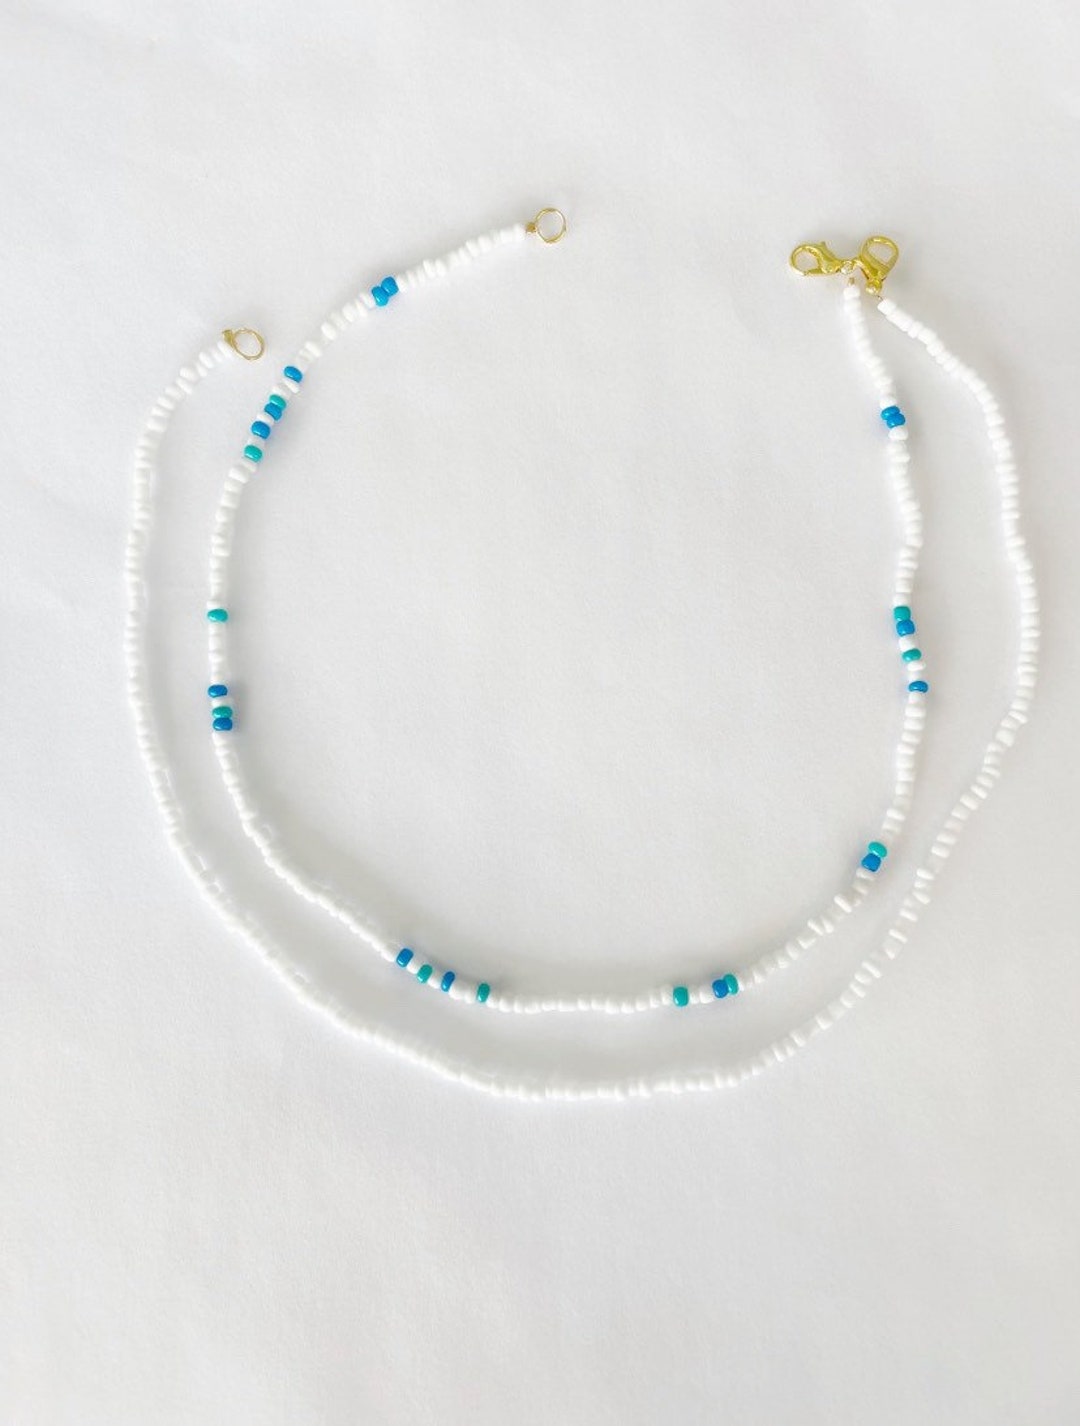 Ocean Seed Bead Necklacedead Bead Necklace Set of Two - Etsy